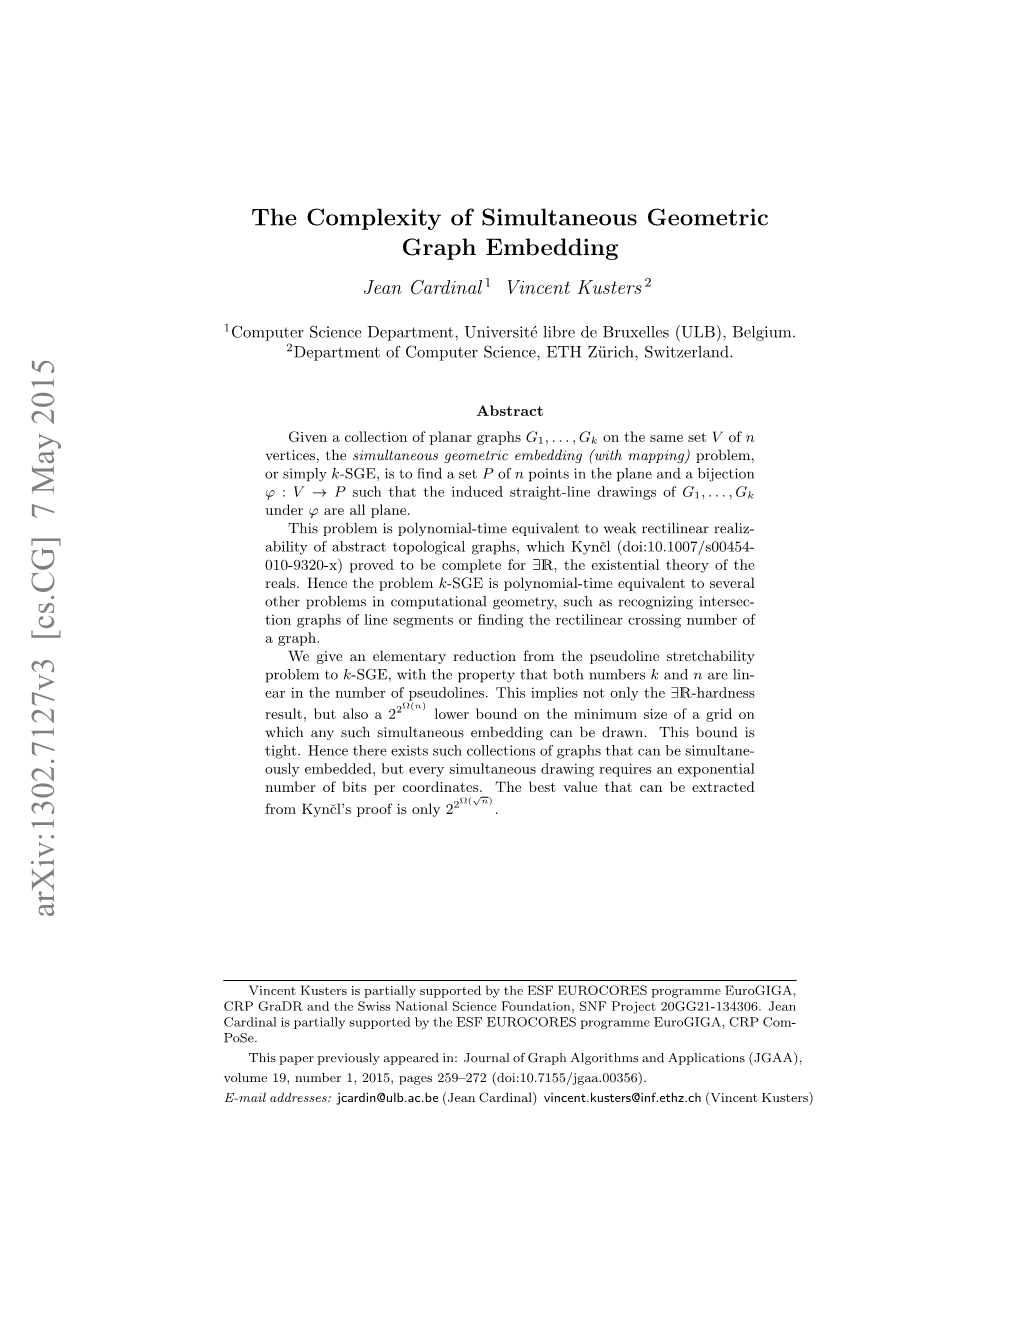 The Complexity of Simultaneous Geometric Graph Embedding Jean Cardinal 1 Vincent Kusters 2